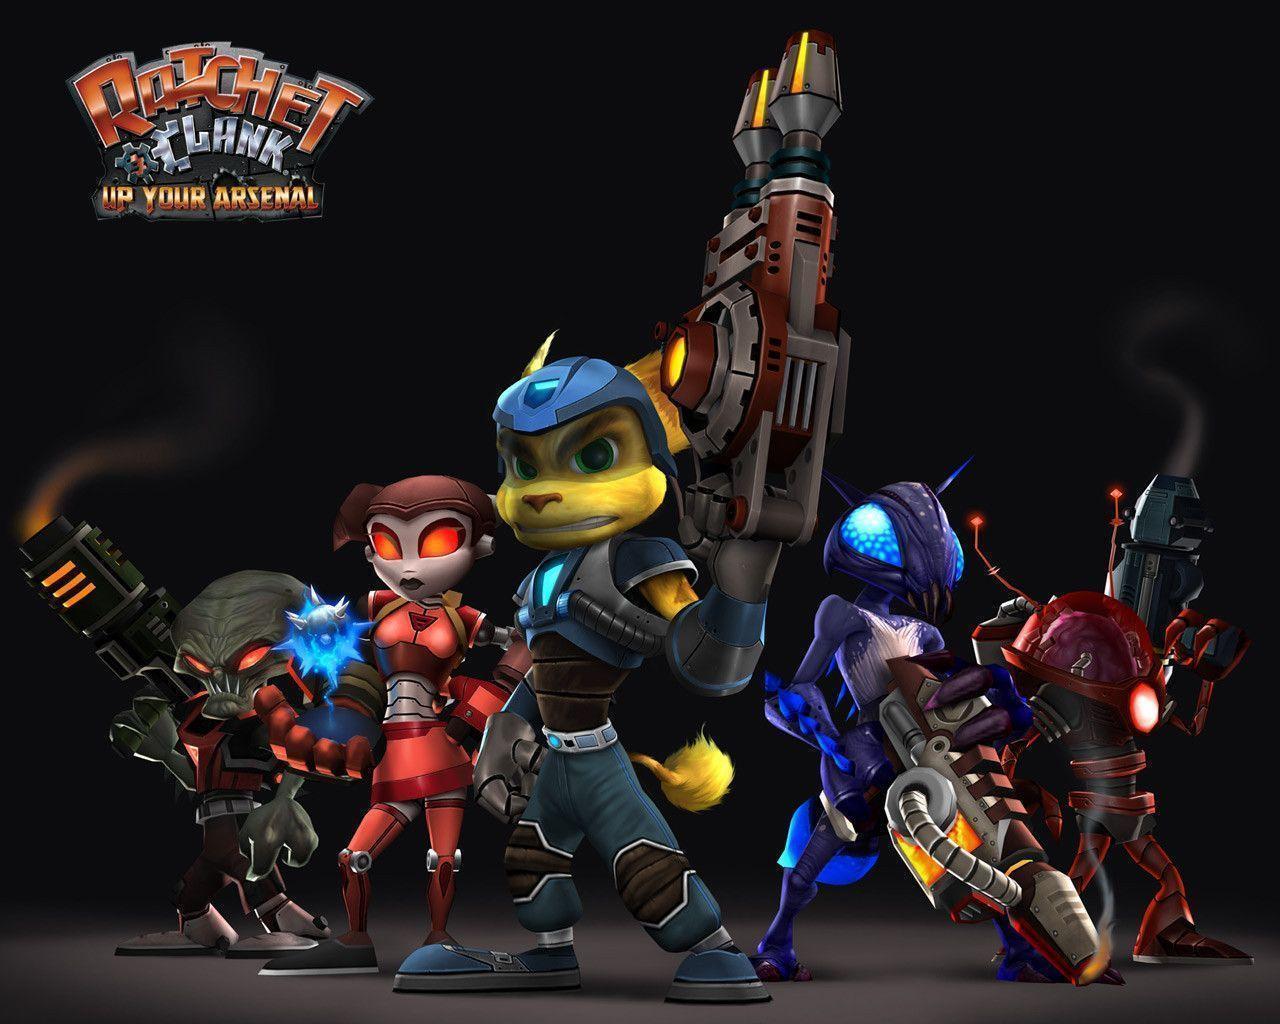 Ratchet & Clank and Clank Wallpaper